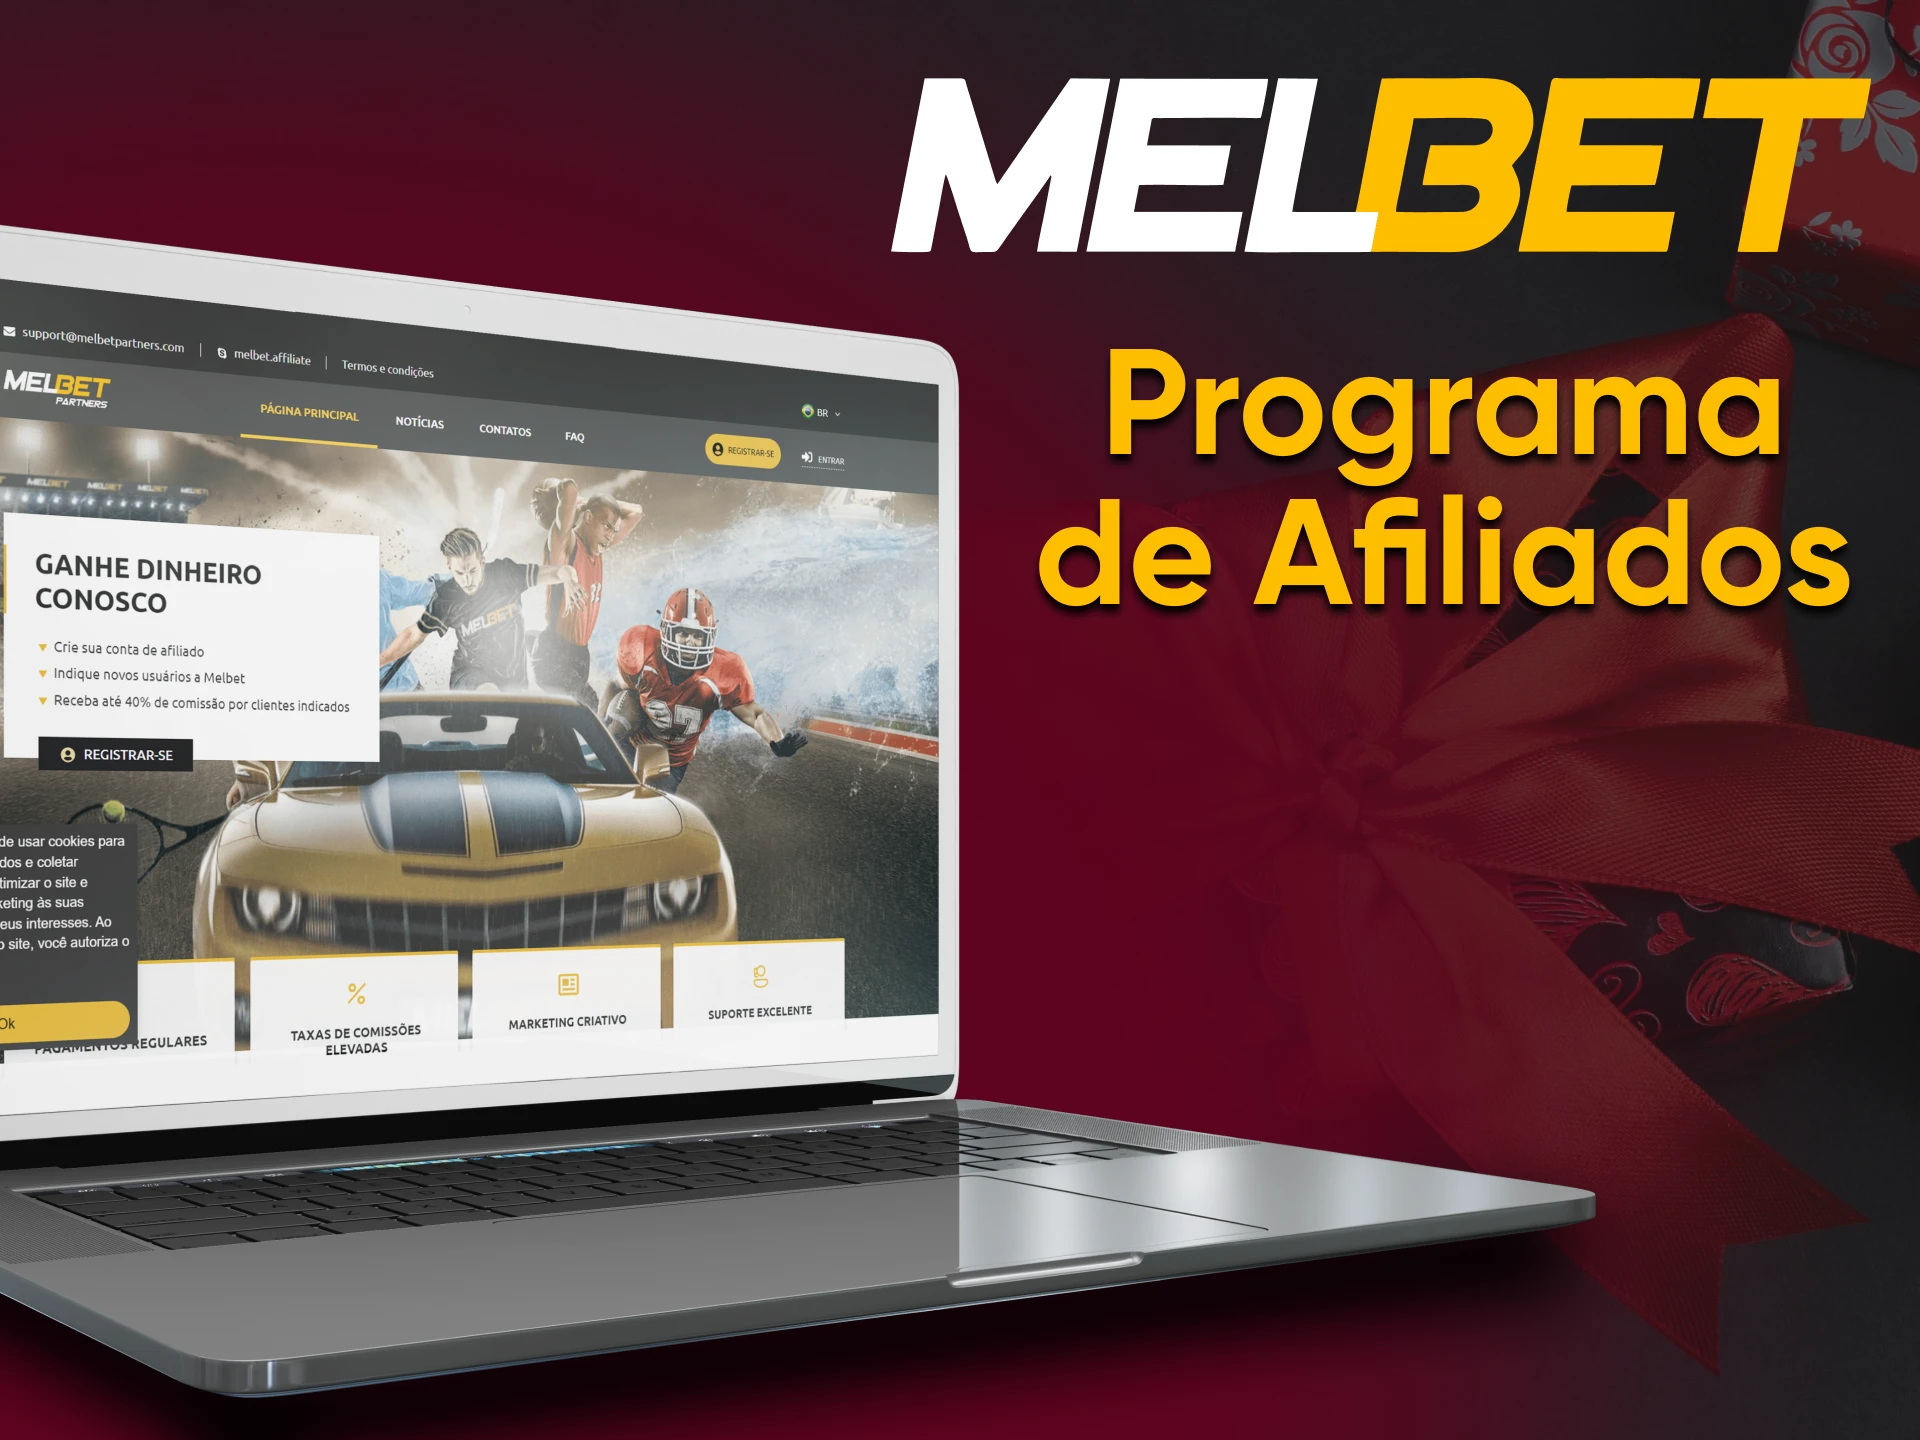 You can get additional bonuses from Melbet.